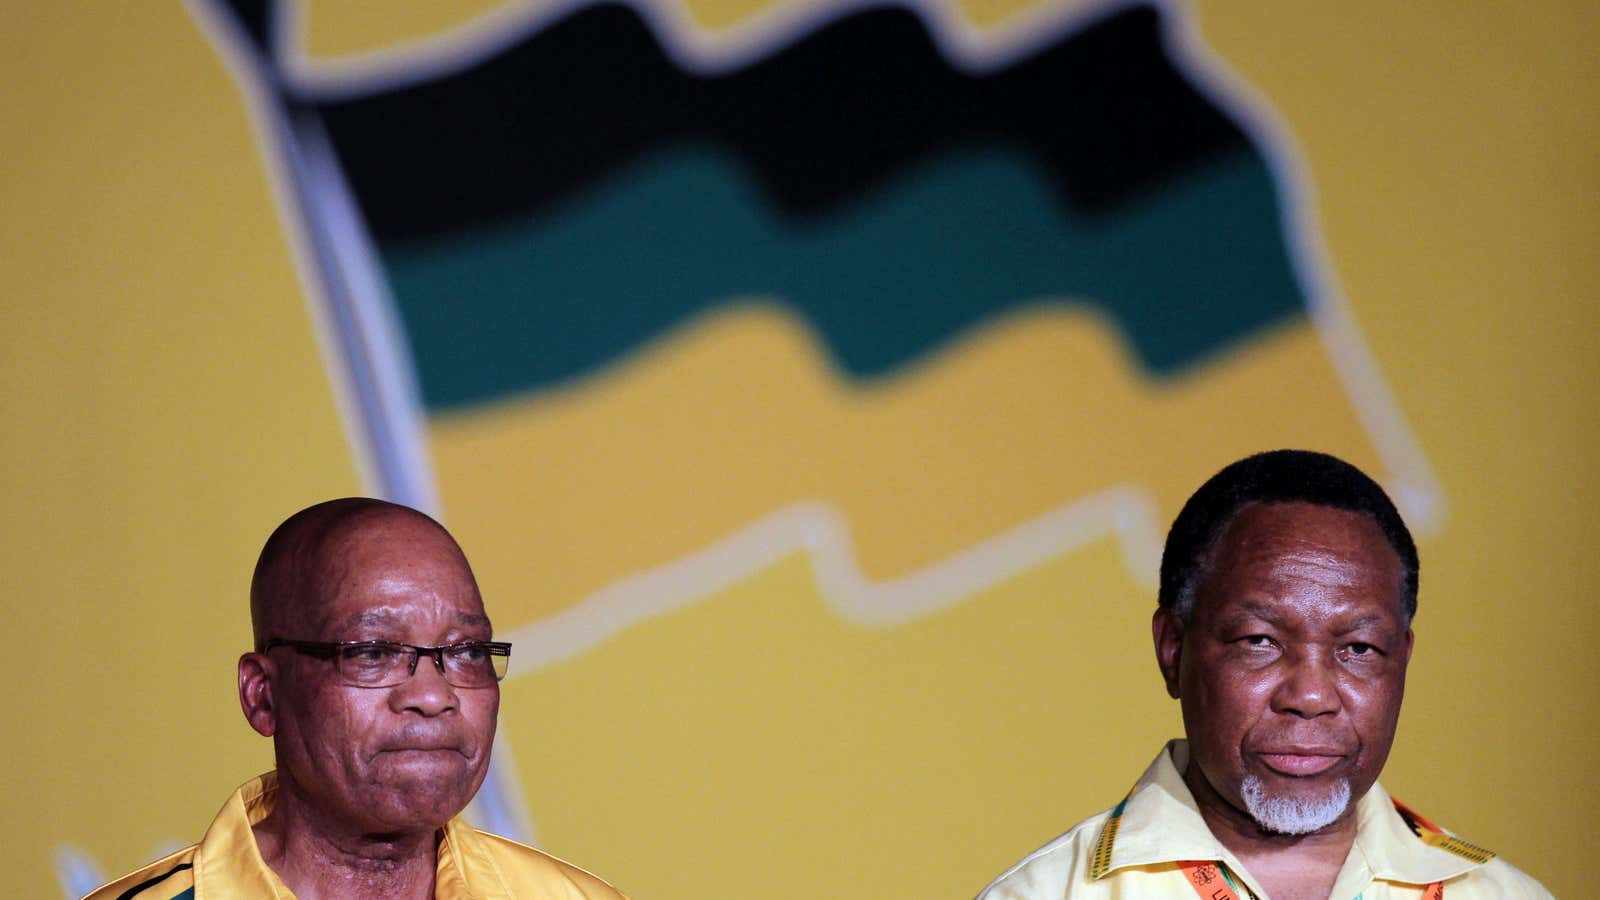 The ruling party African National Congress (ANC) president Jacob Zuma, left, with his deputy Kgalema Motlanthe, right, have a marred image to reform.